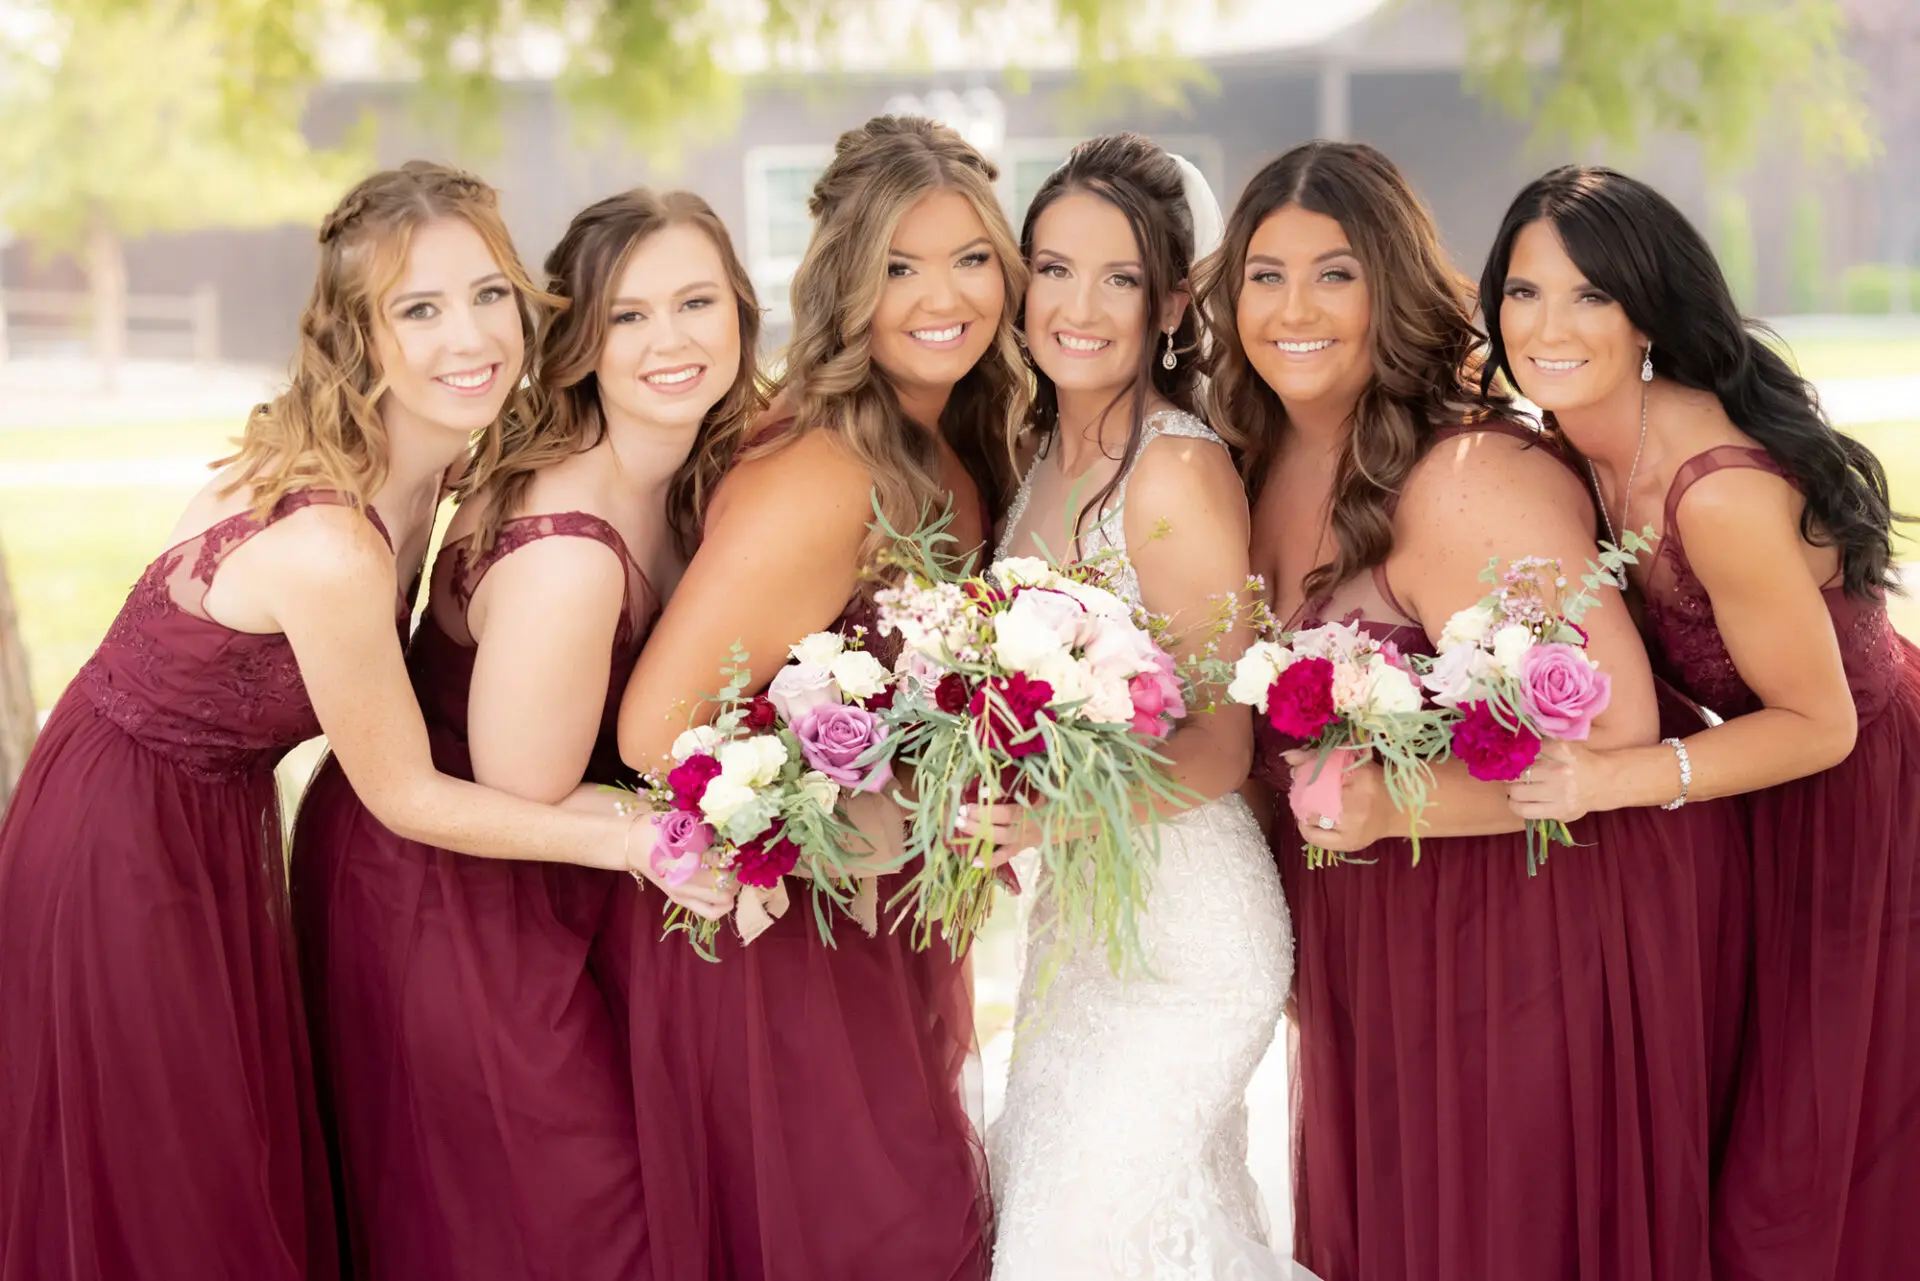 The beautiful bride and her beautiful bridesmaids